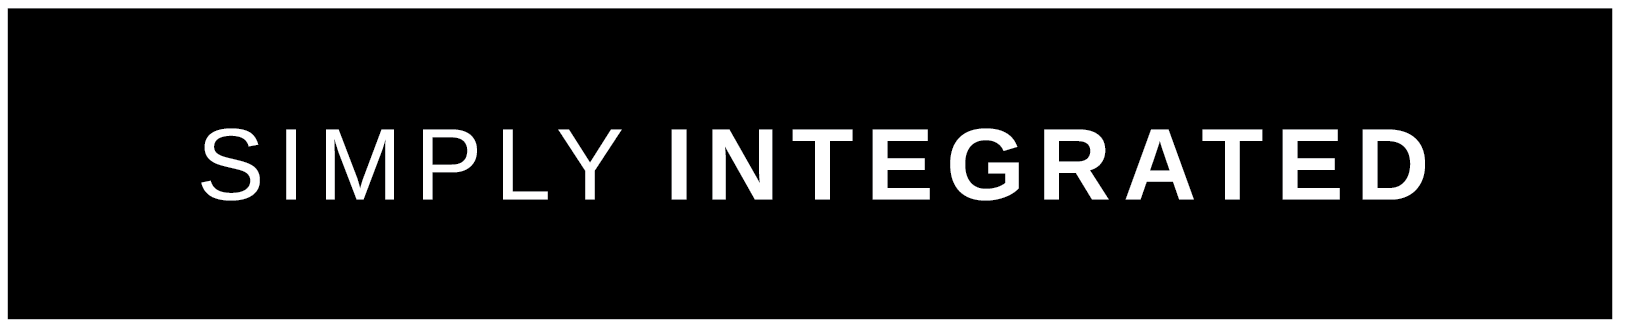 Simply Integrated Logo